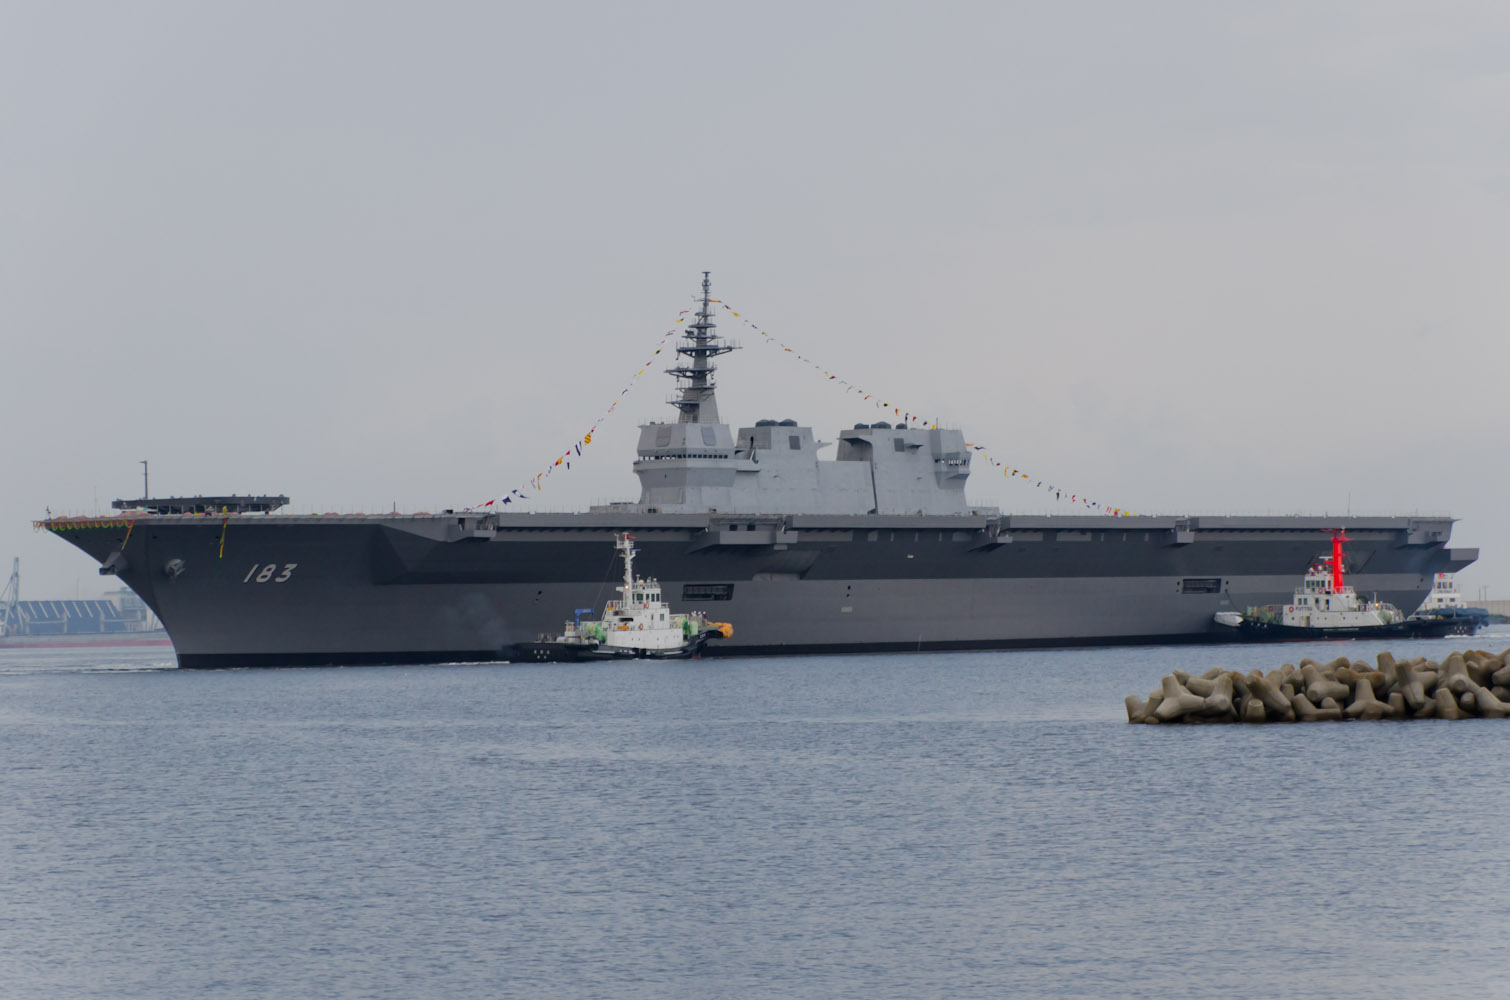 JS_Izumo_(DDH-183)_just_after_her_launch.jpg